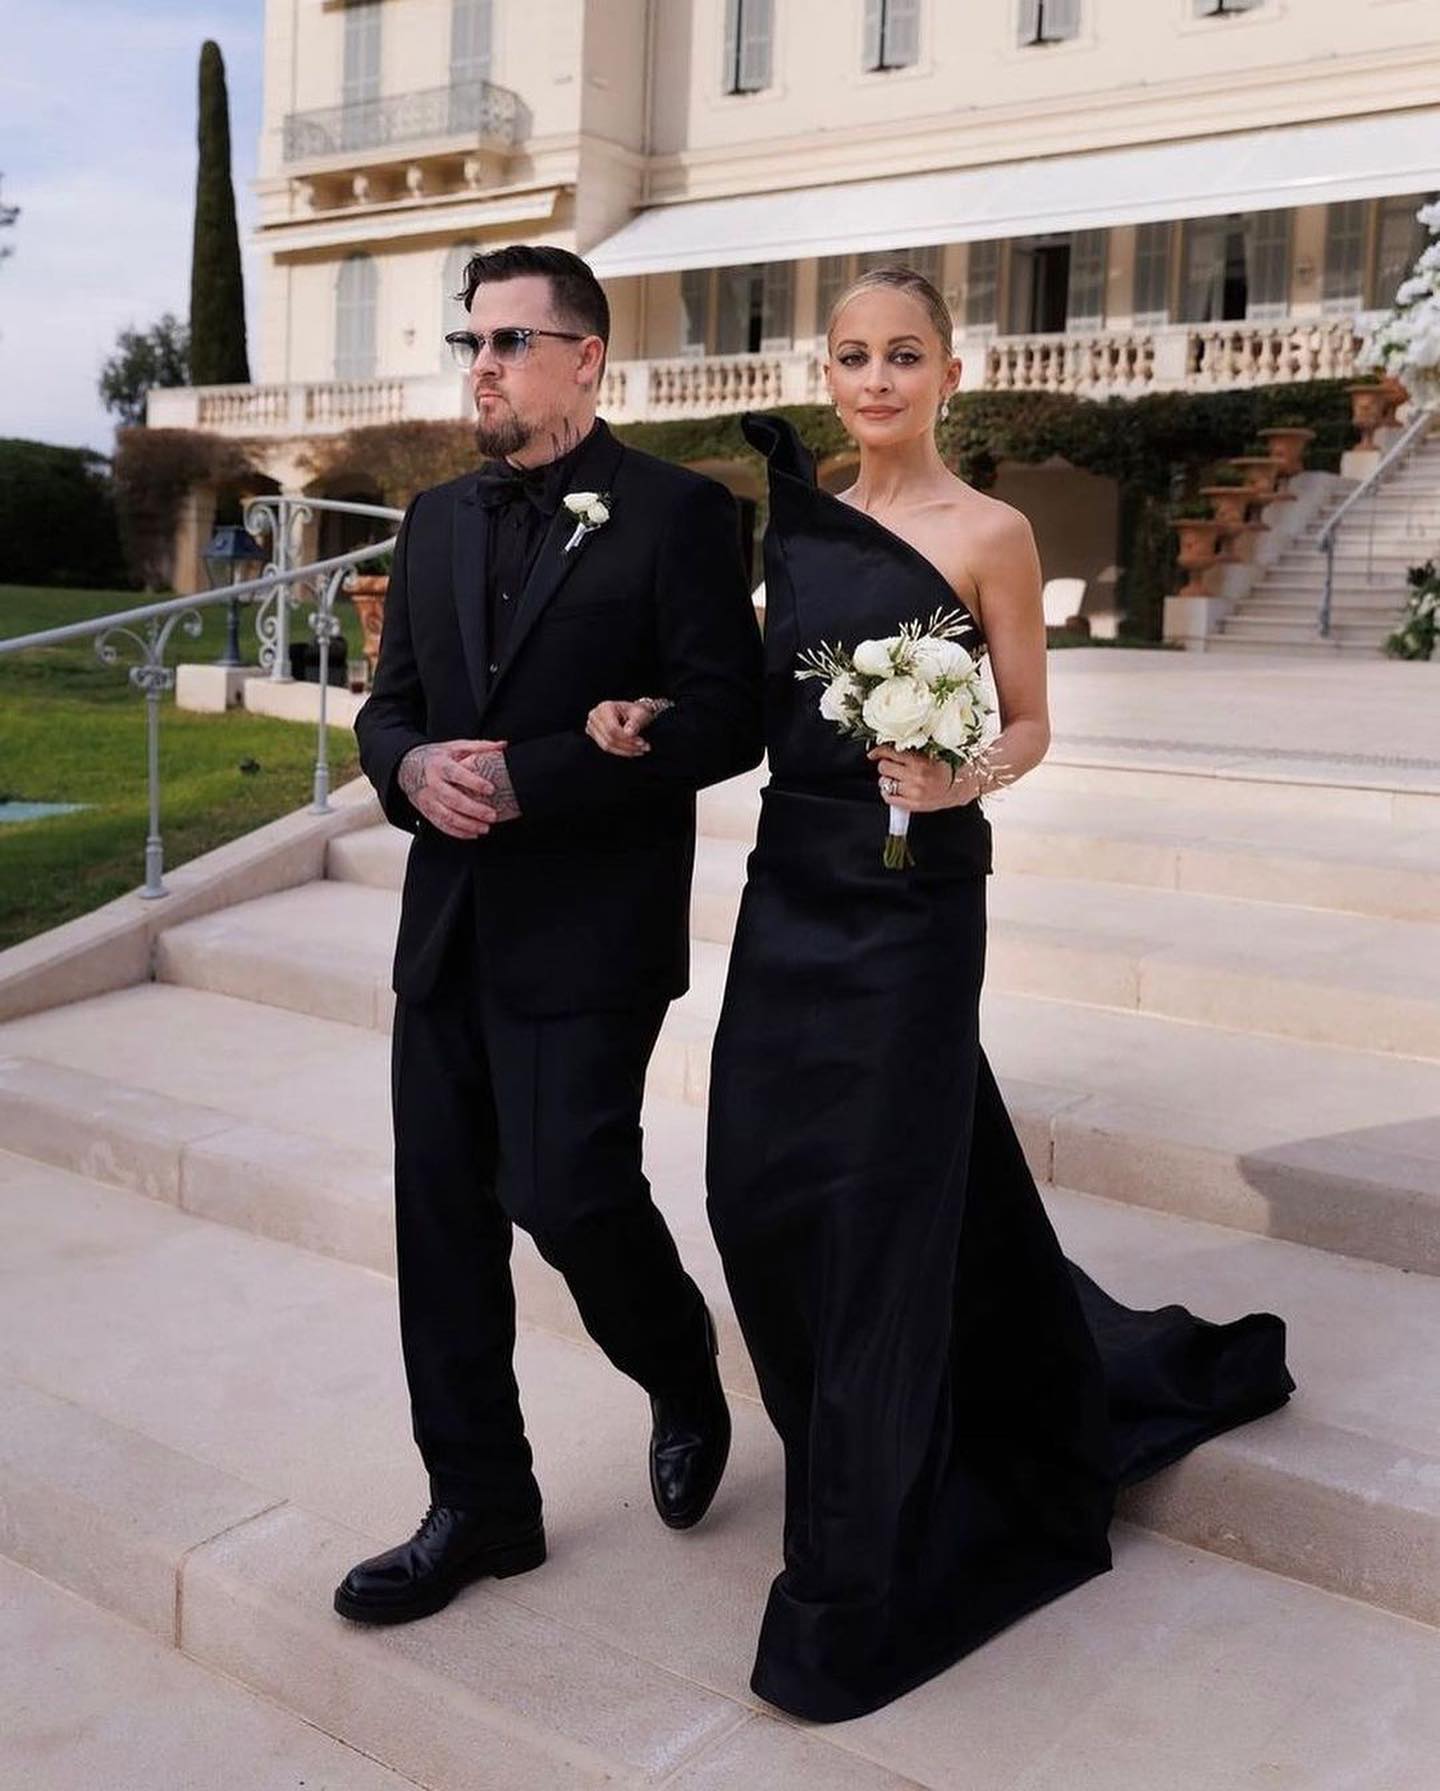 What Is “Black Tie Optional”? The Most Confusing Wedding Dress